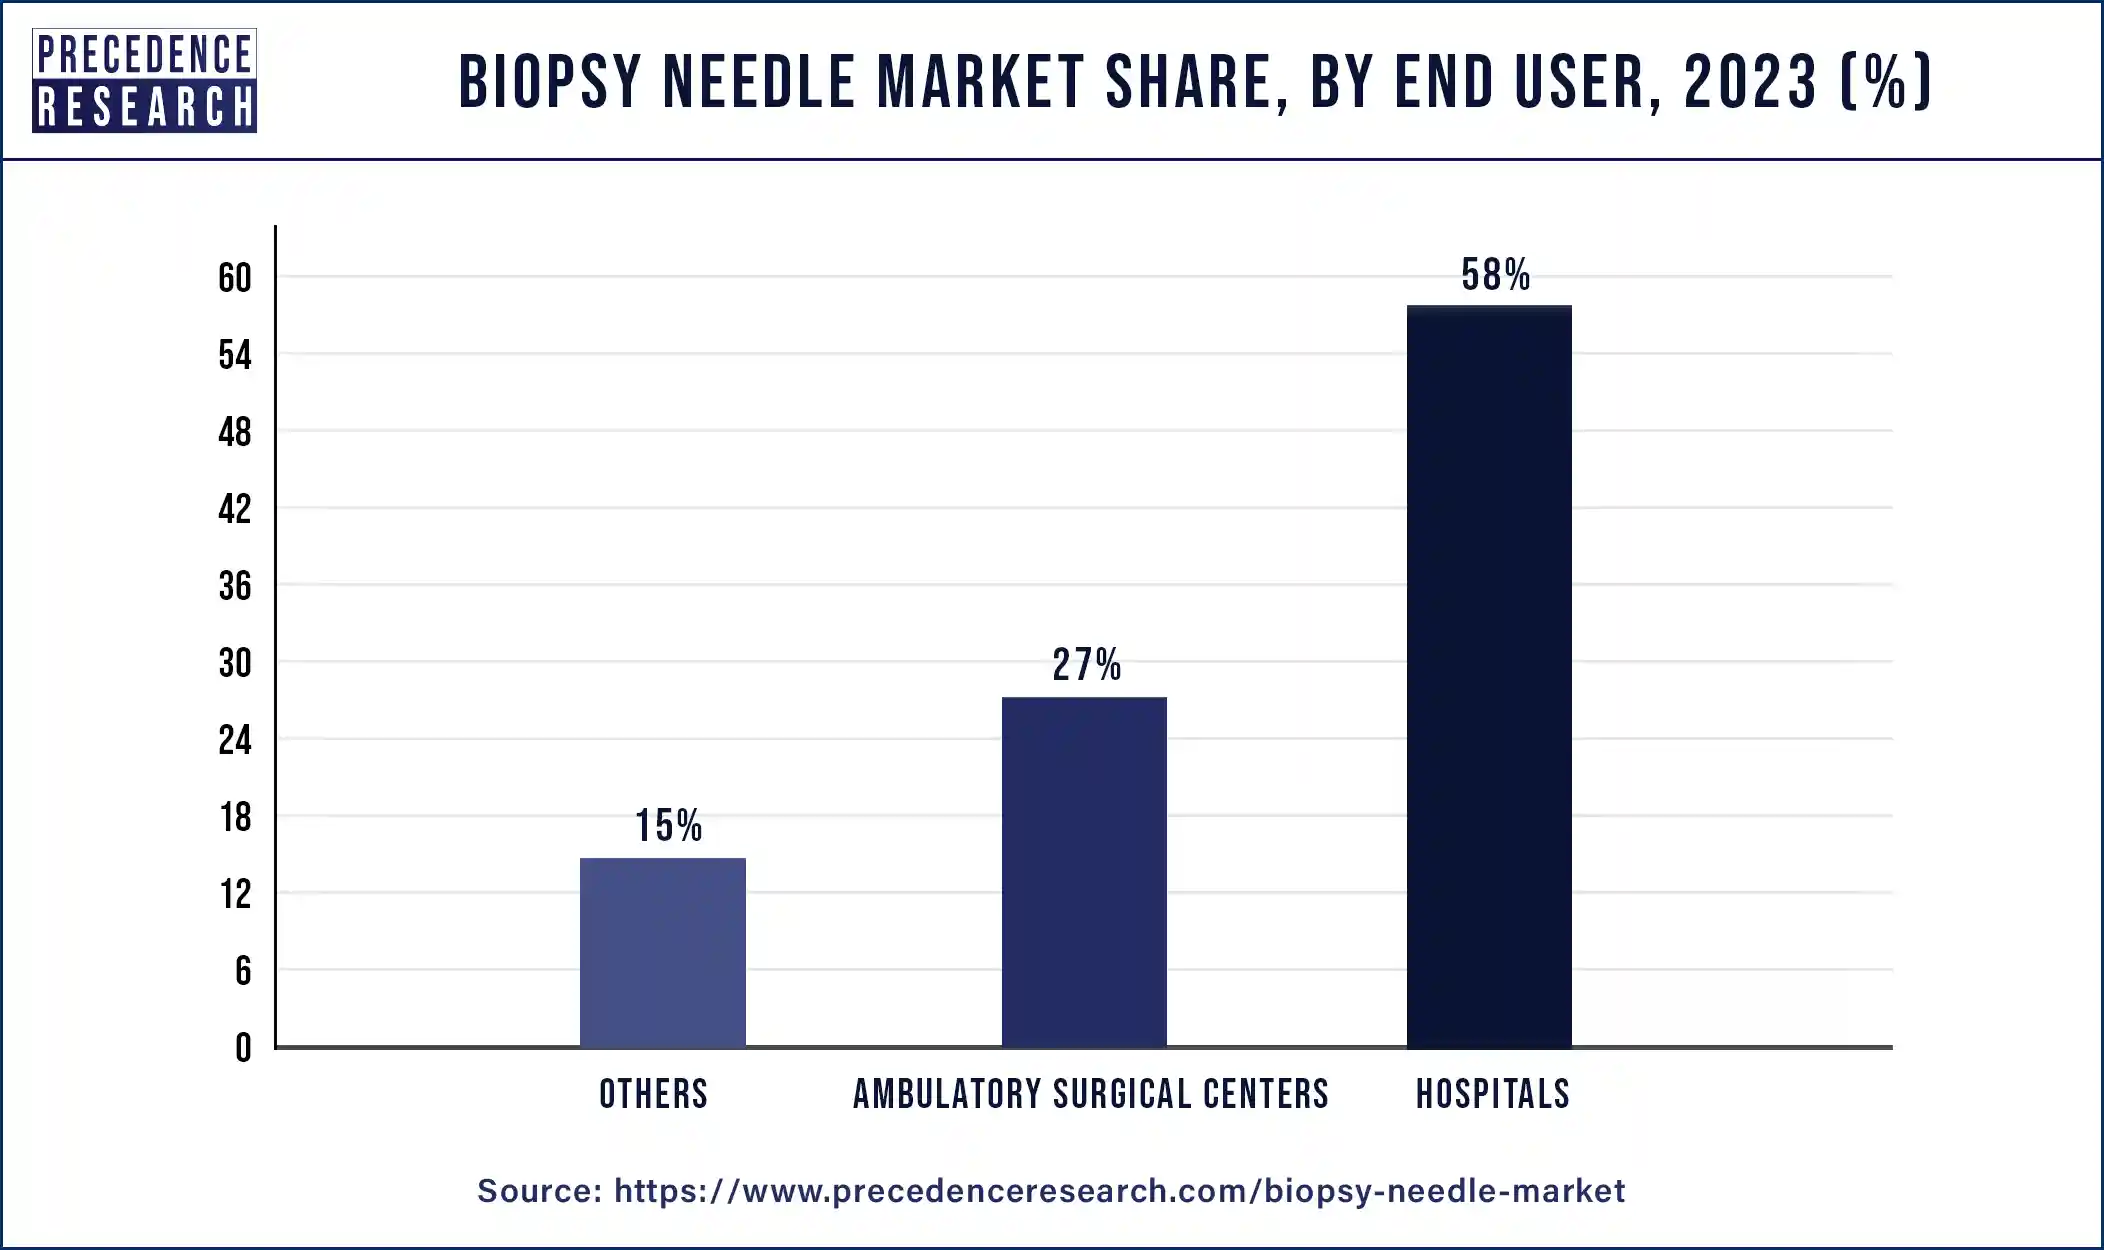 Biopsy Needle Market Share, By End User, 2023 (%)